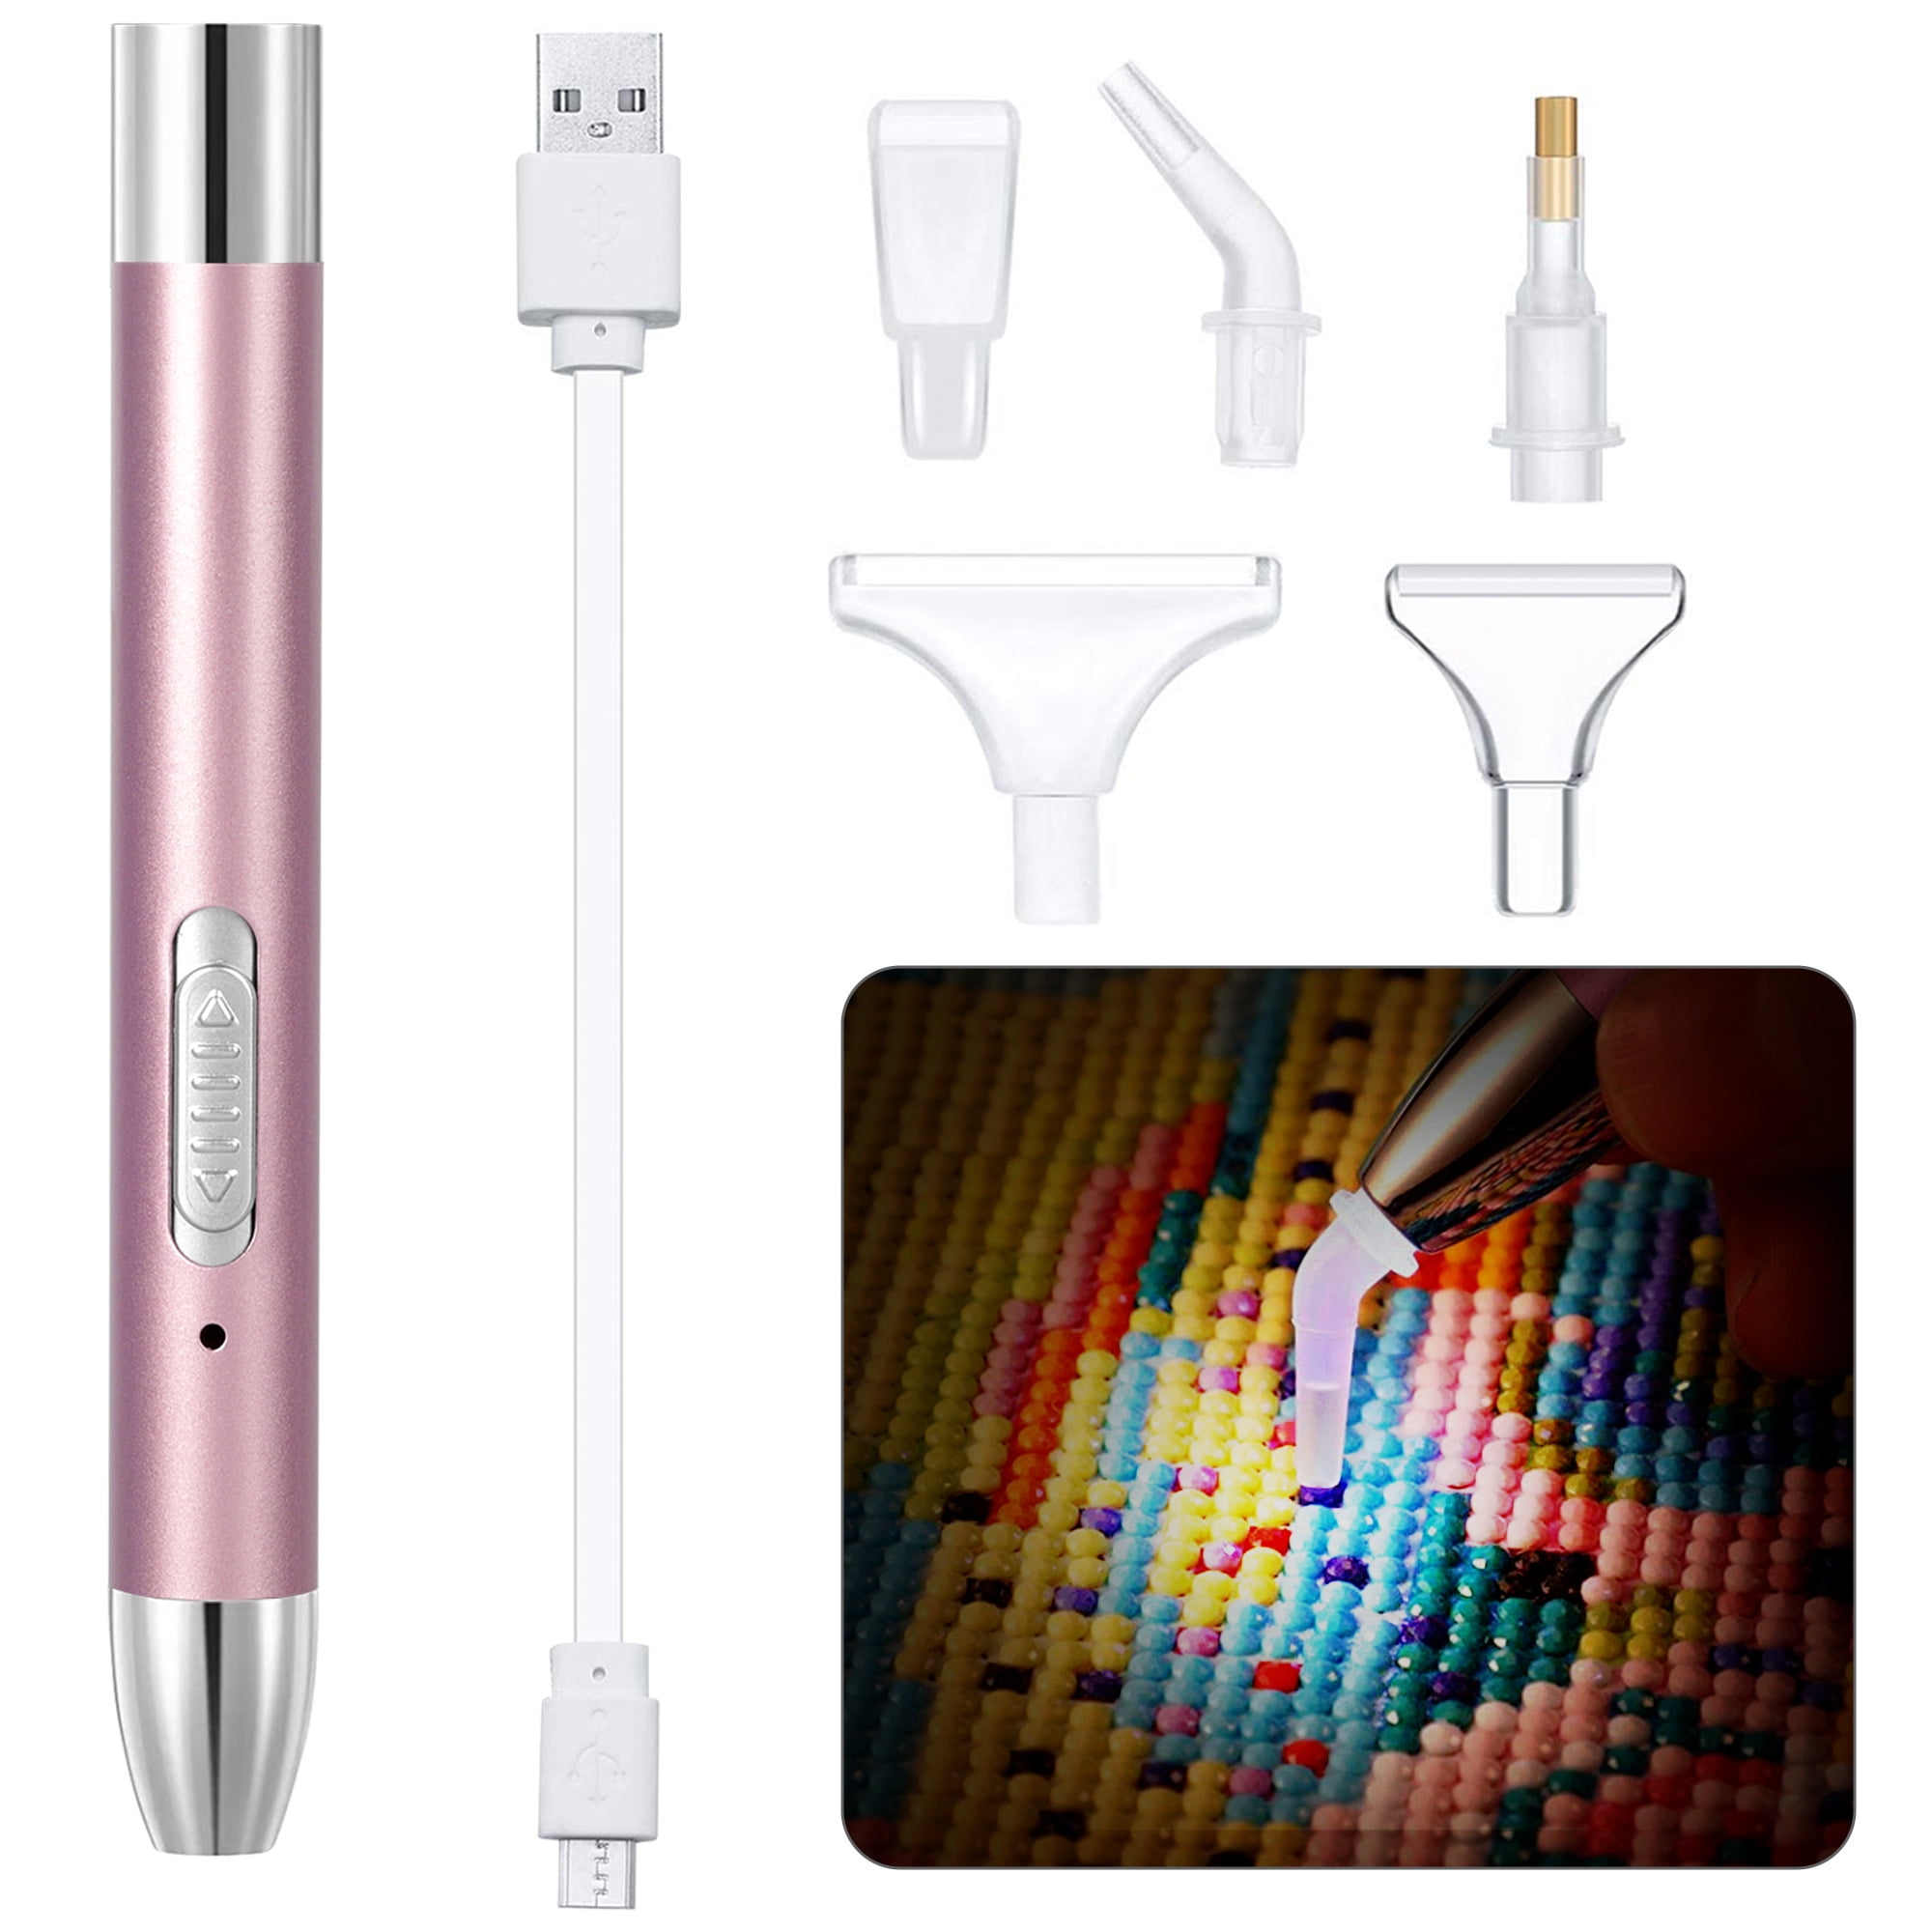  Hztyyier Diamond Painting Pen with Light, USB